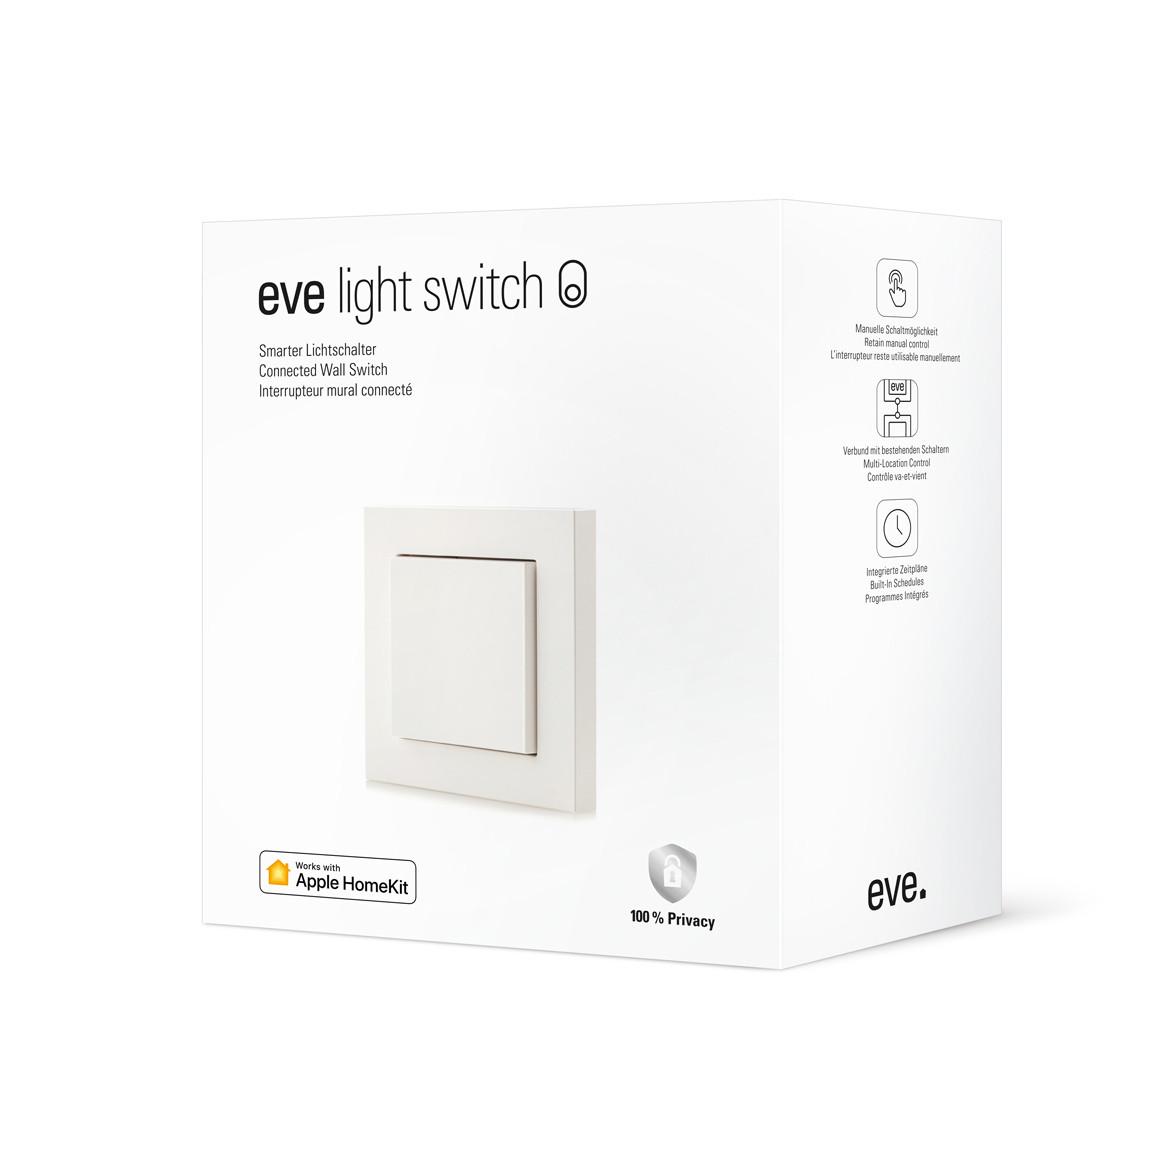 Eve Light Switch (2. Generation) Package